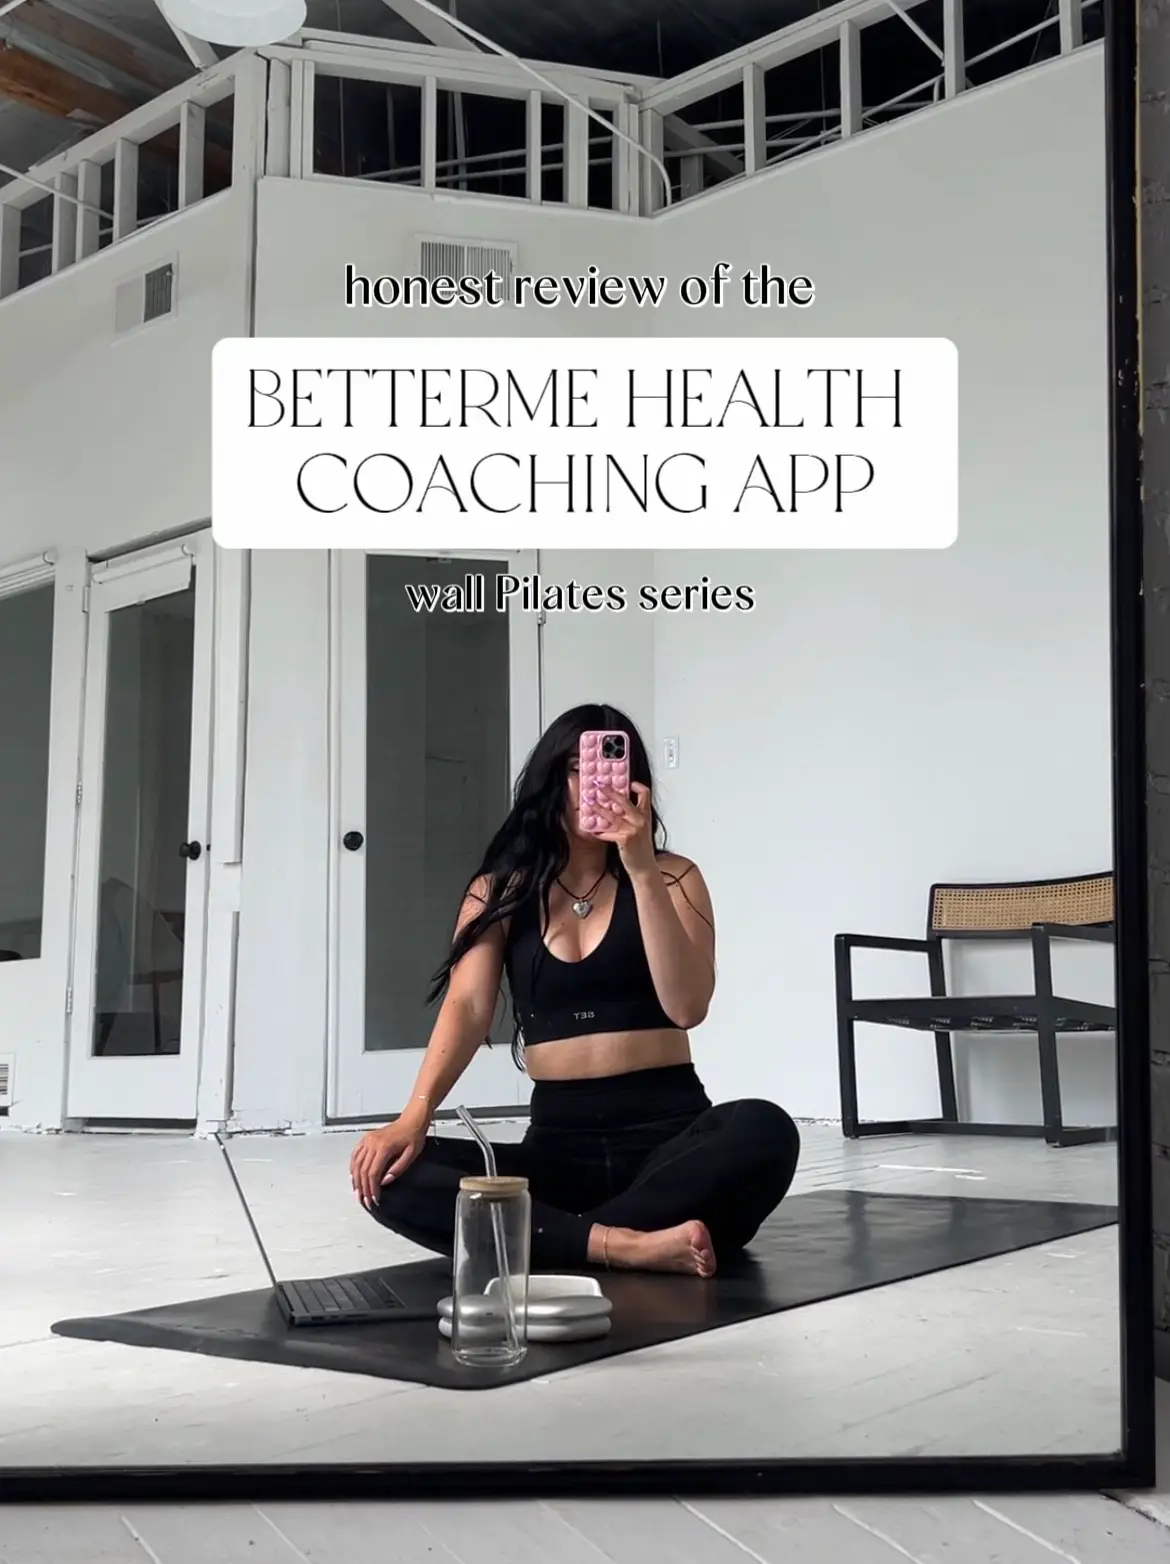 Review of Wall Pilates on BetterMe Health App